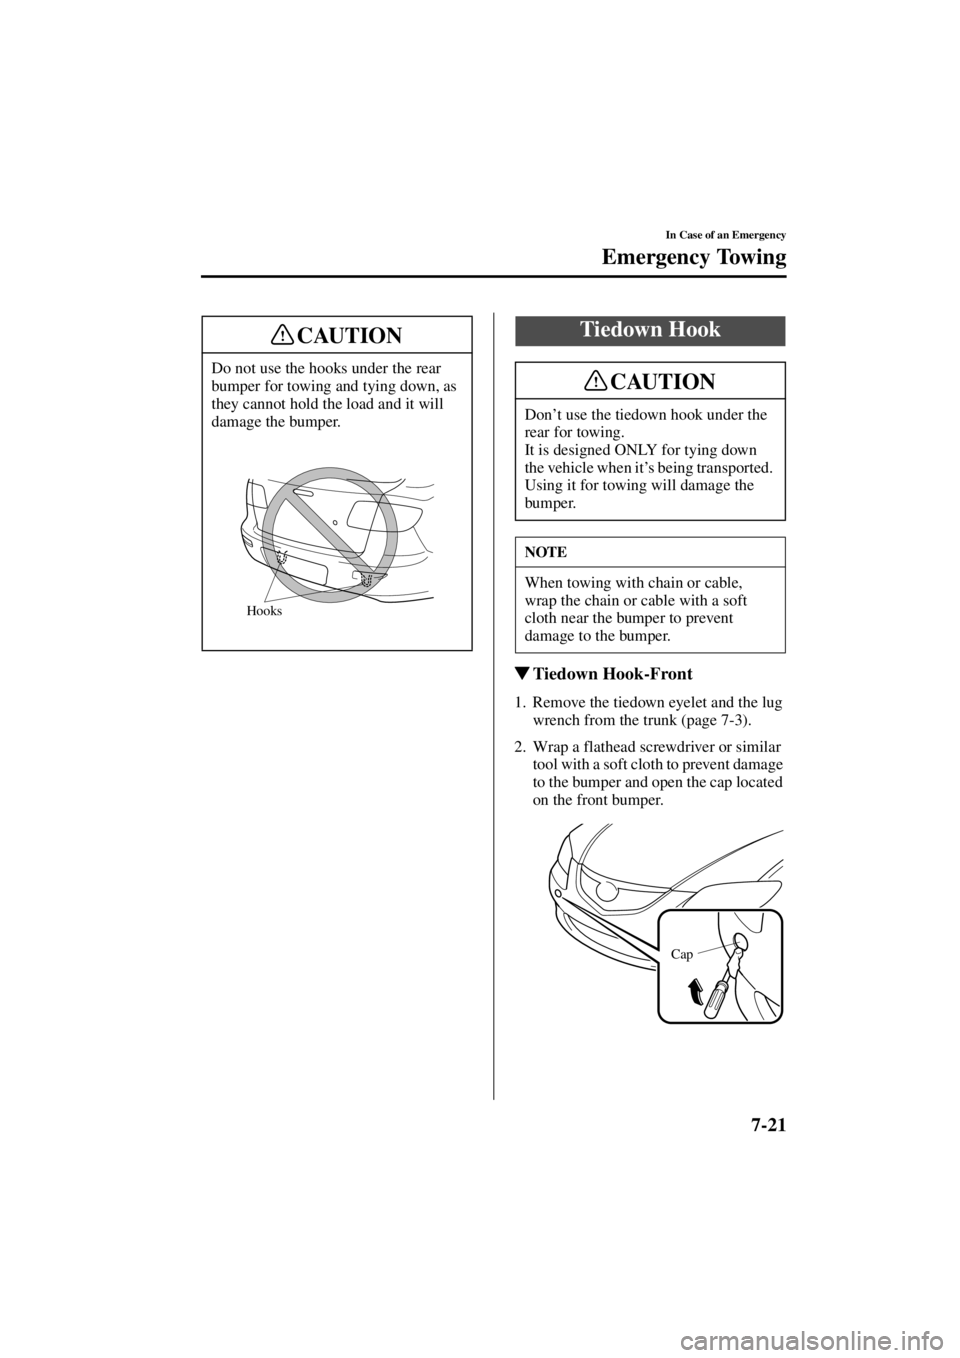 MAZDA MODEL 3 4-DOOR 2004  Owners Manual 7-21
In Case of an Emergency
Emergency Towing
Form No. 8S18-EA-03I
Tiedown Hook-Front
1. Remove the tiedown eyelet and the lug 
wrench from the trunk (page 7-3).
2. Wrap a flathead screwdriver or sim